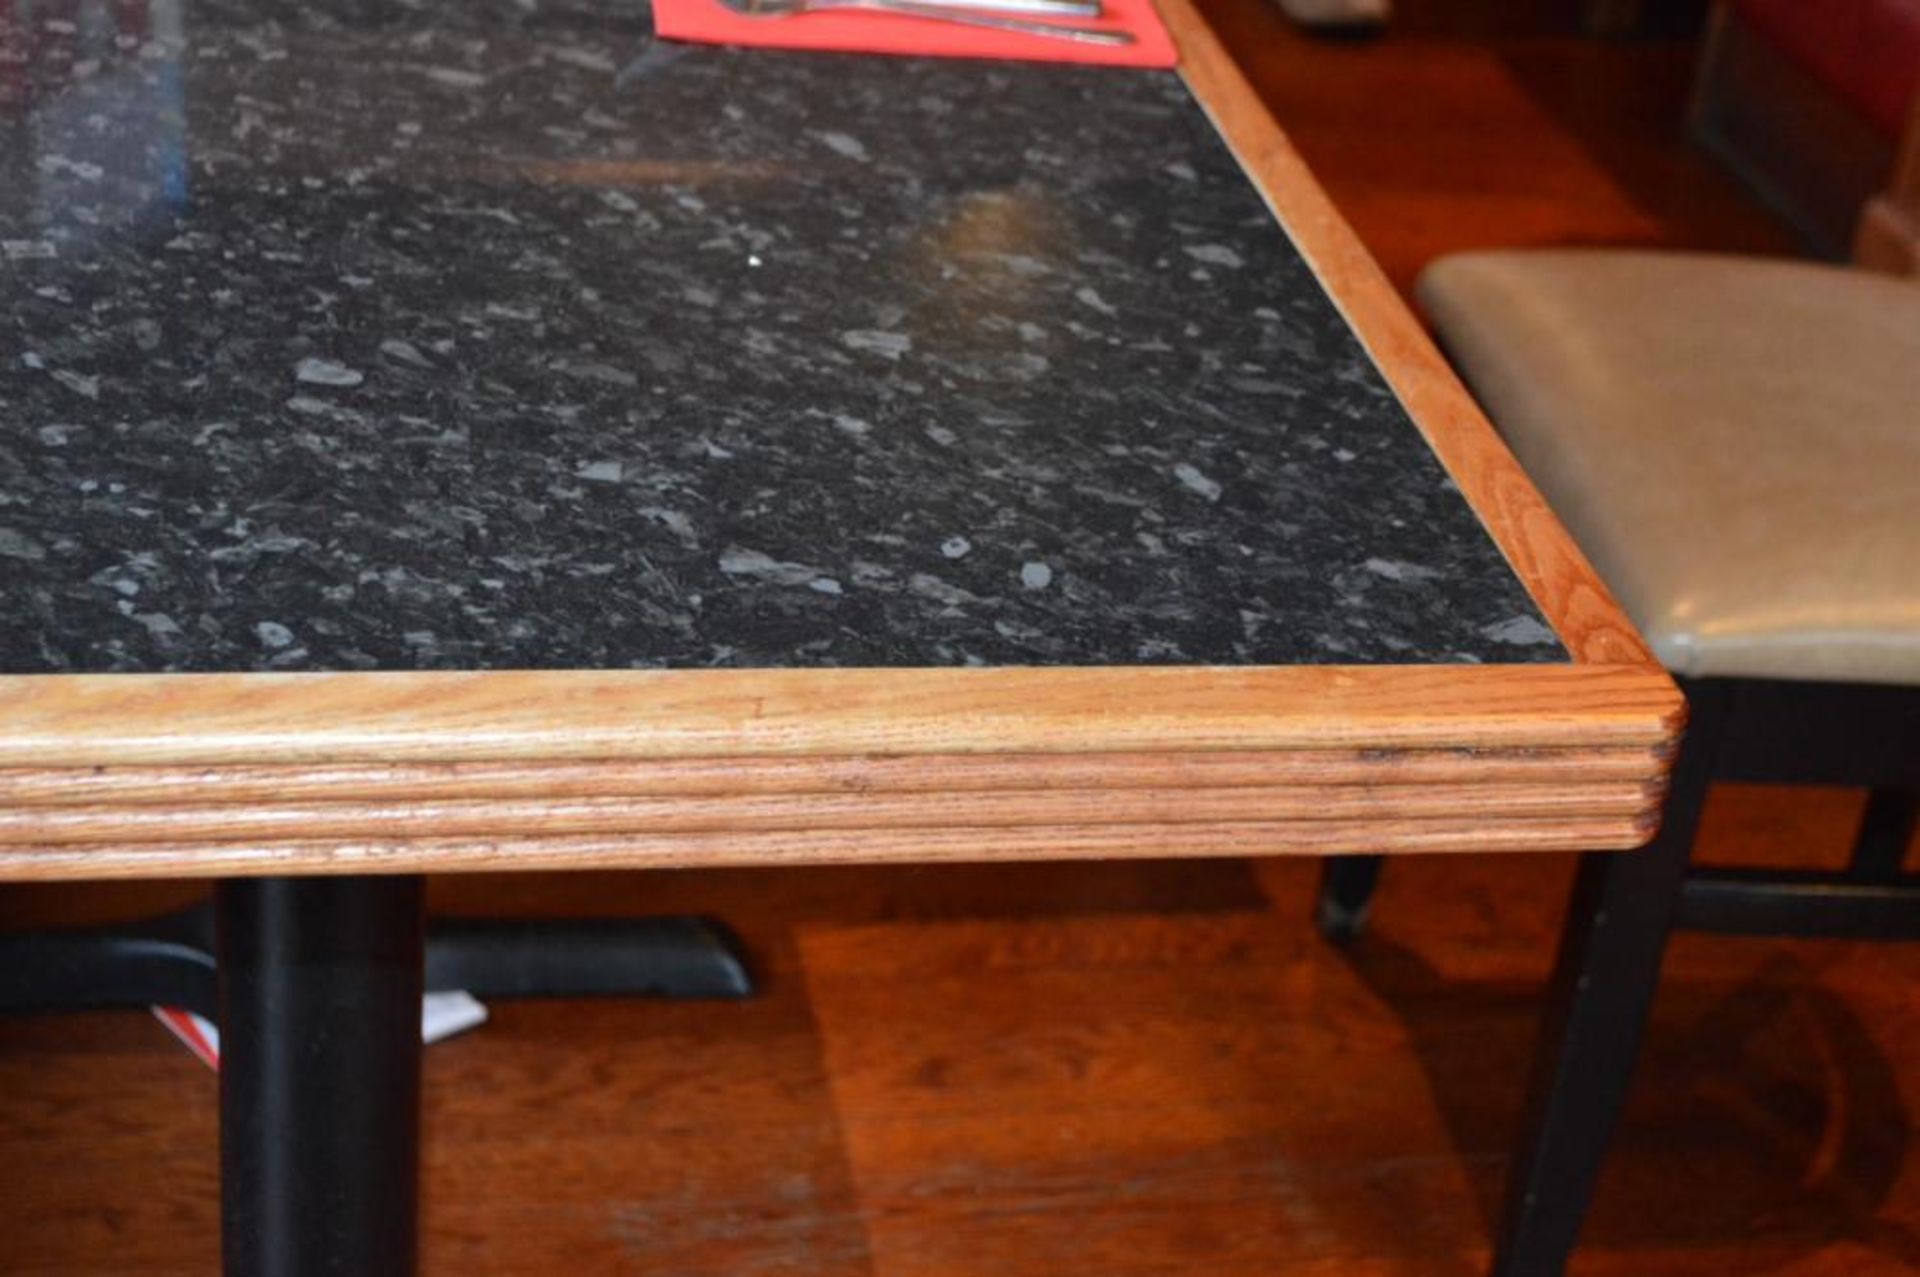 5 x Small Two Seater Restaurant Dining Tables With Granite Effect Surface, Wooden Edging and Cast Ir - Image 5 of 5